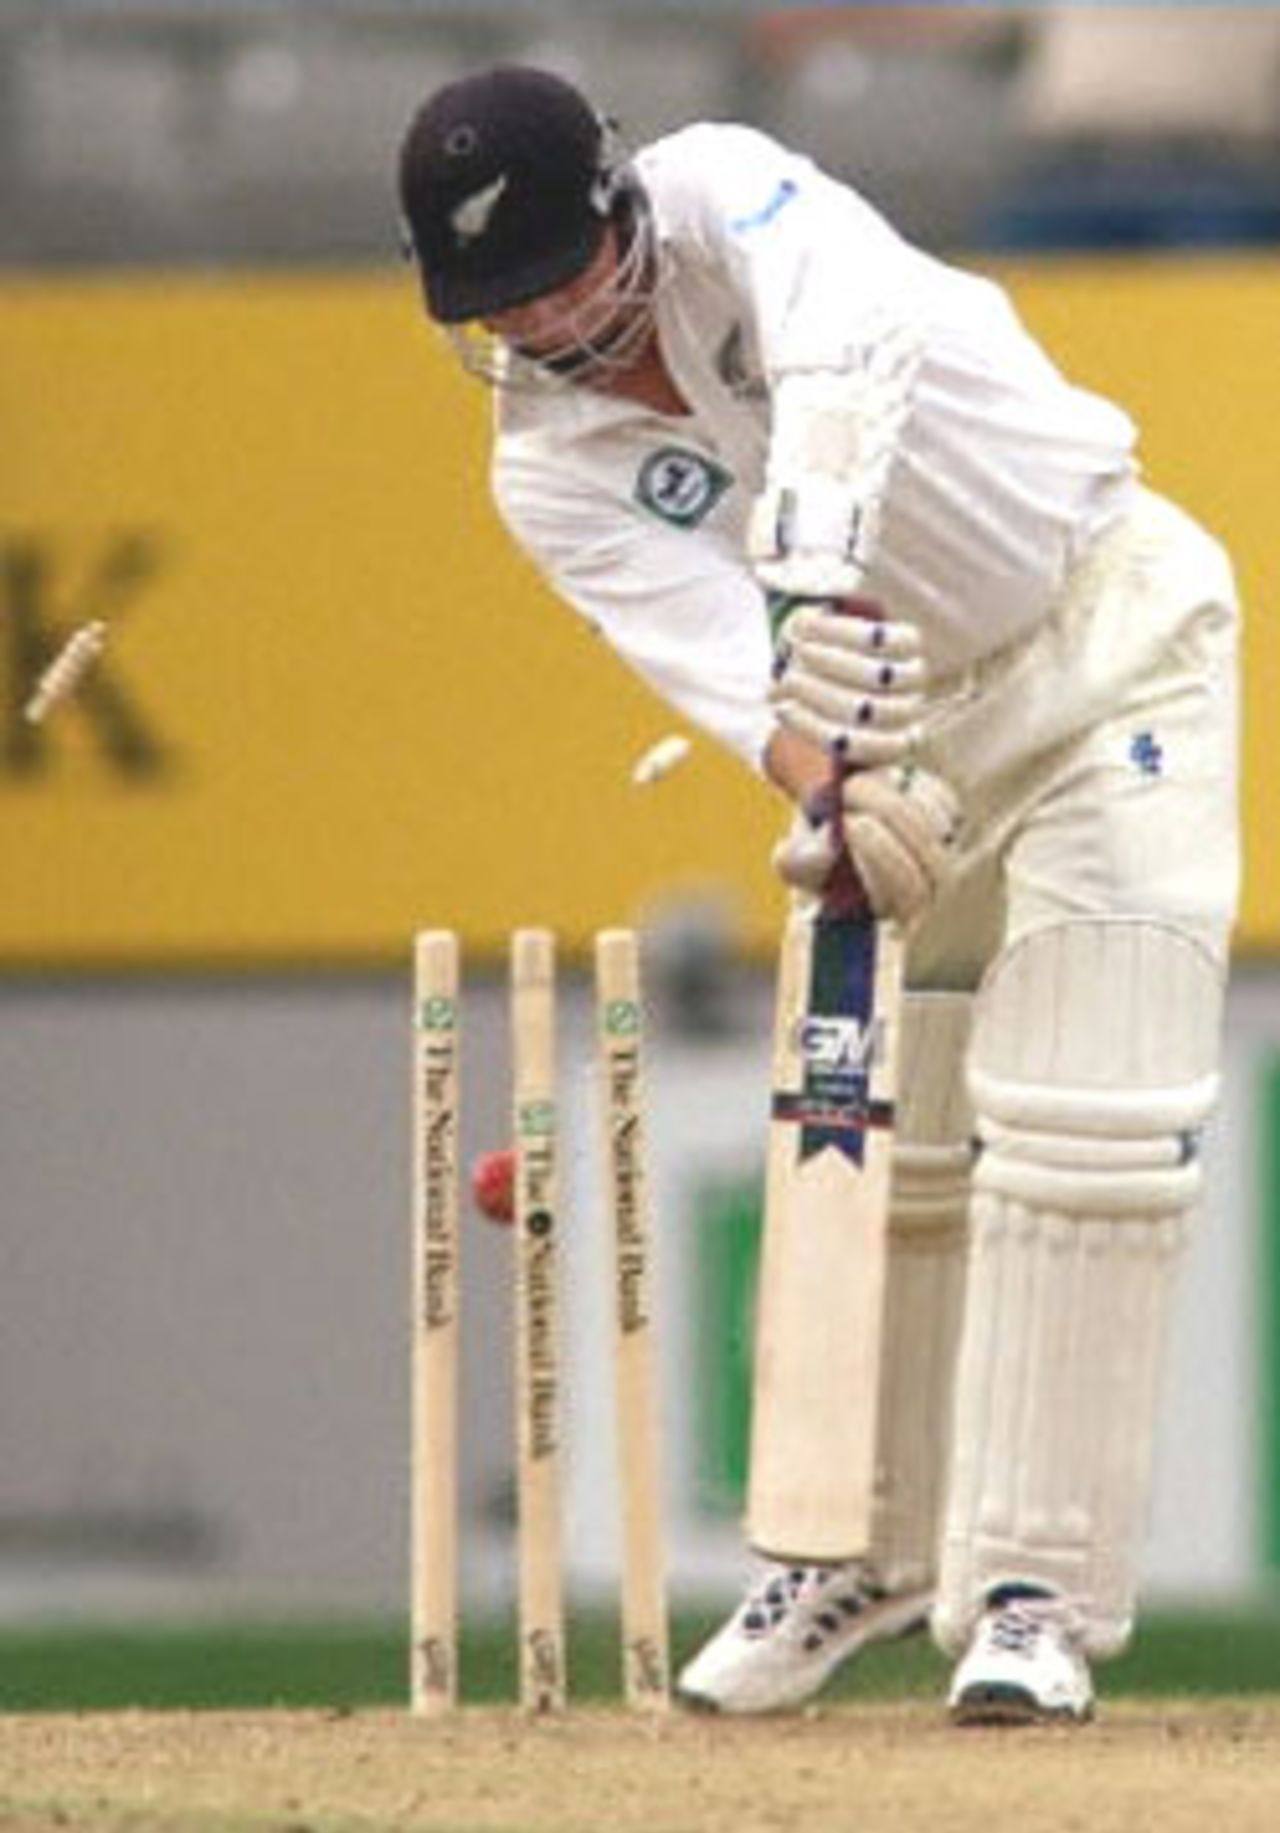 New Zealand night watchman Paul Wiseman is cleaned bowled on the last ball of the day by Australian speedster Brett Lee on the first day of the first Test Match at Eden Park in Auckland 11 March 2000. Australia was dismissed for 214 in their first innings and in reply New Zealand is in trouble at 25-4 at stumps.